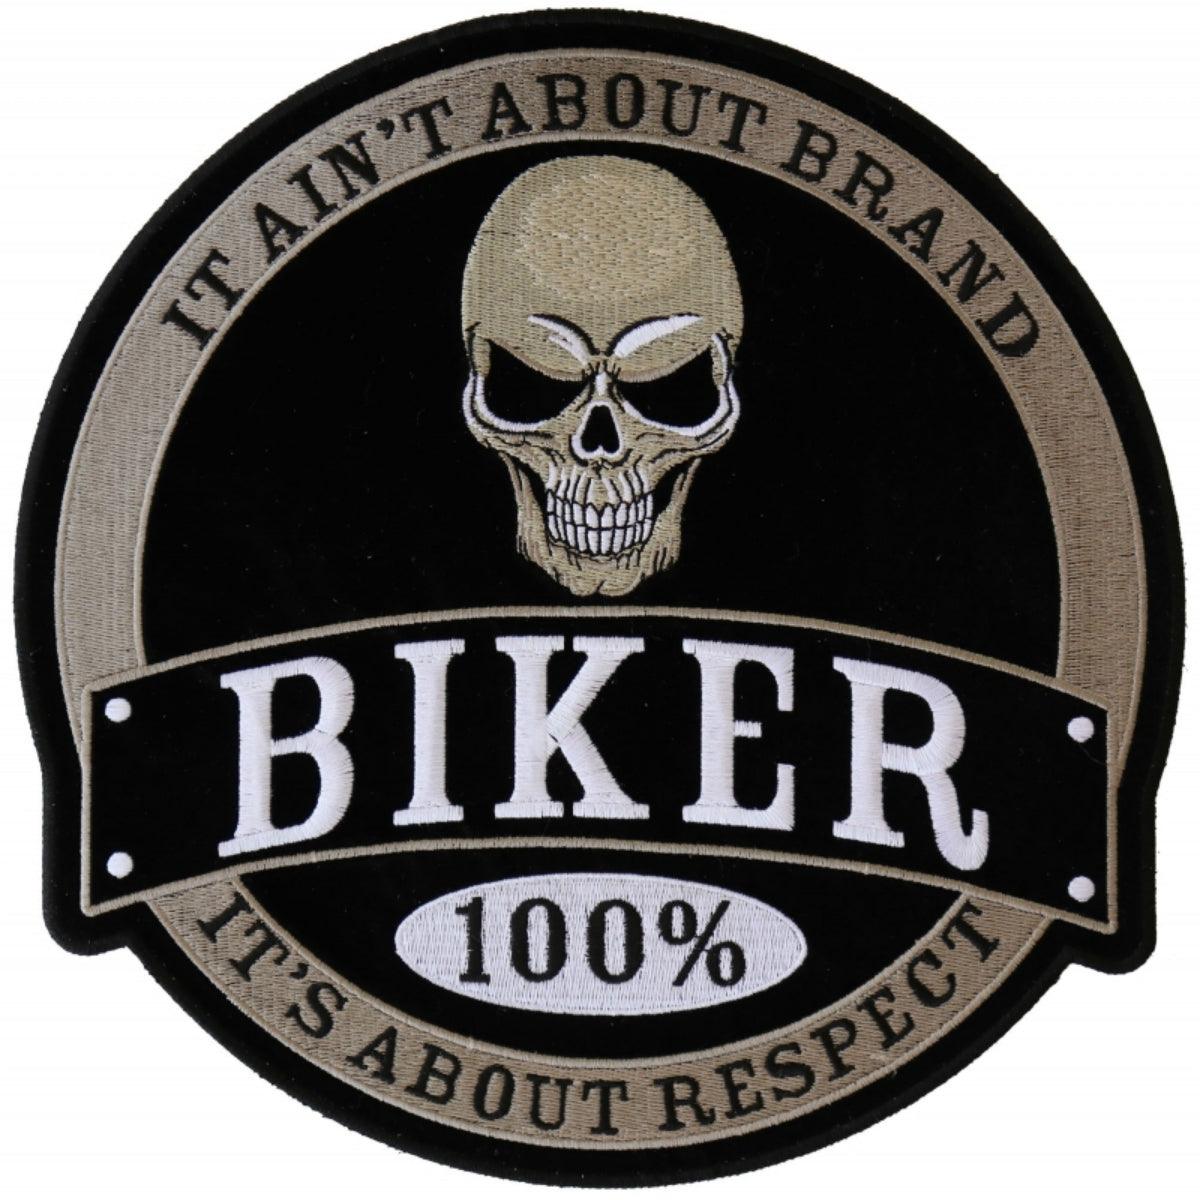 Daniel Smart 100% Biker Skull Embroidered Iron on Patch, 10 x 10 inches - American Legend Rider